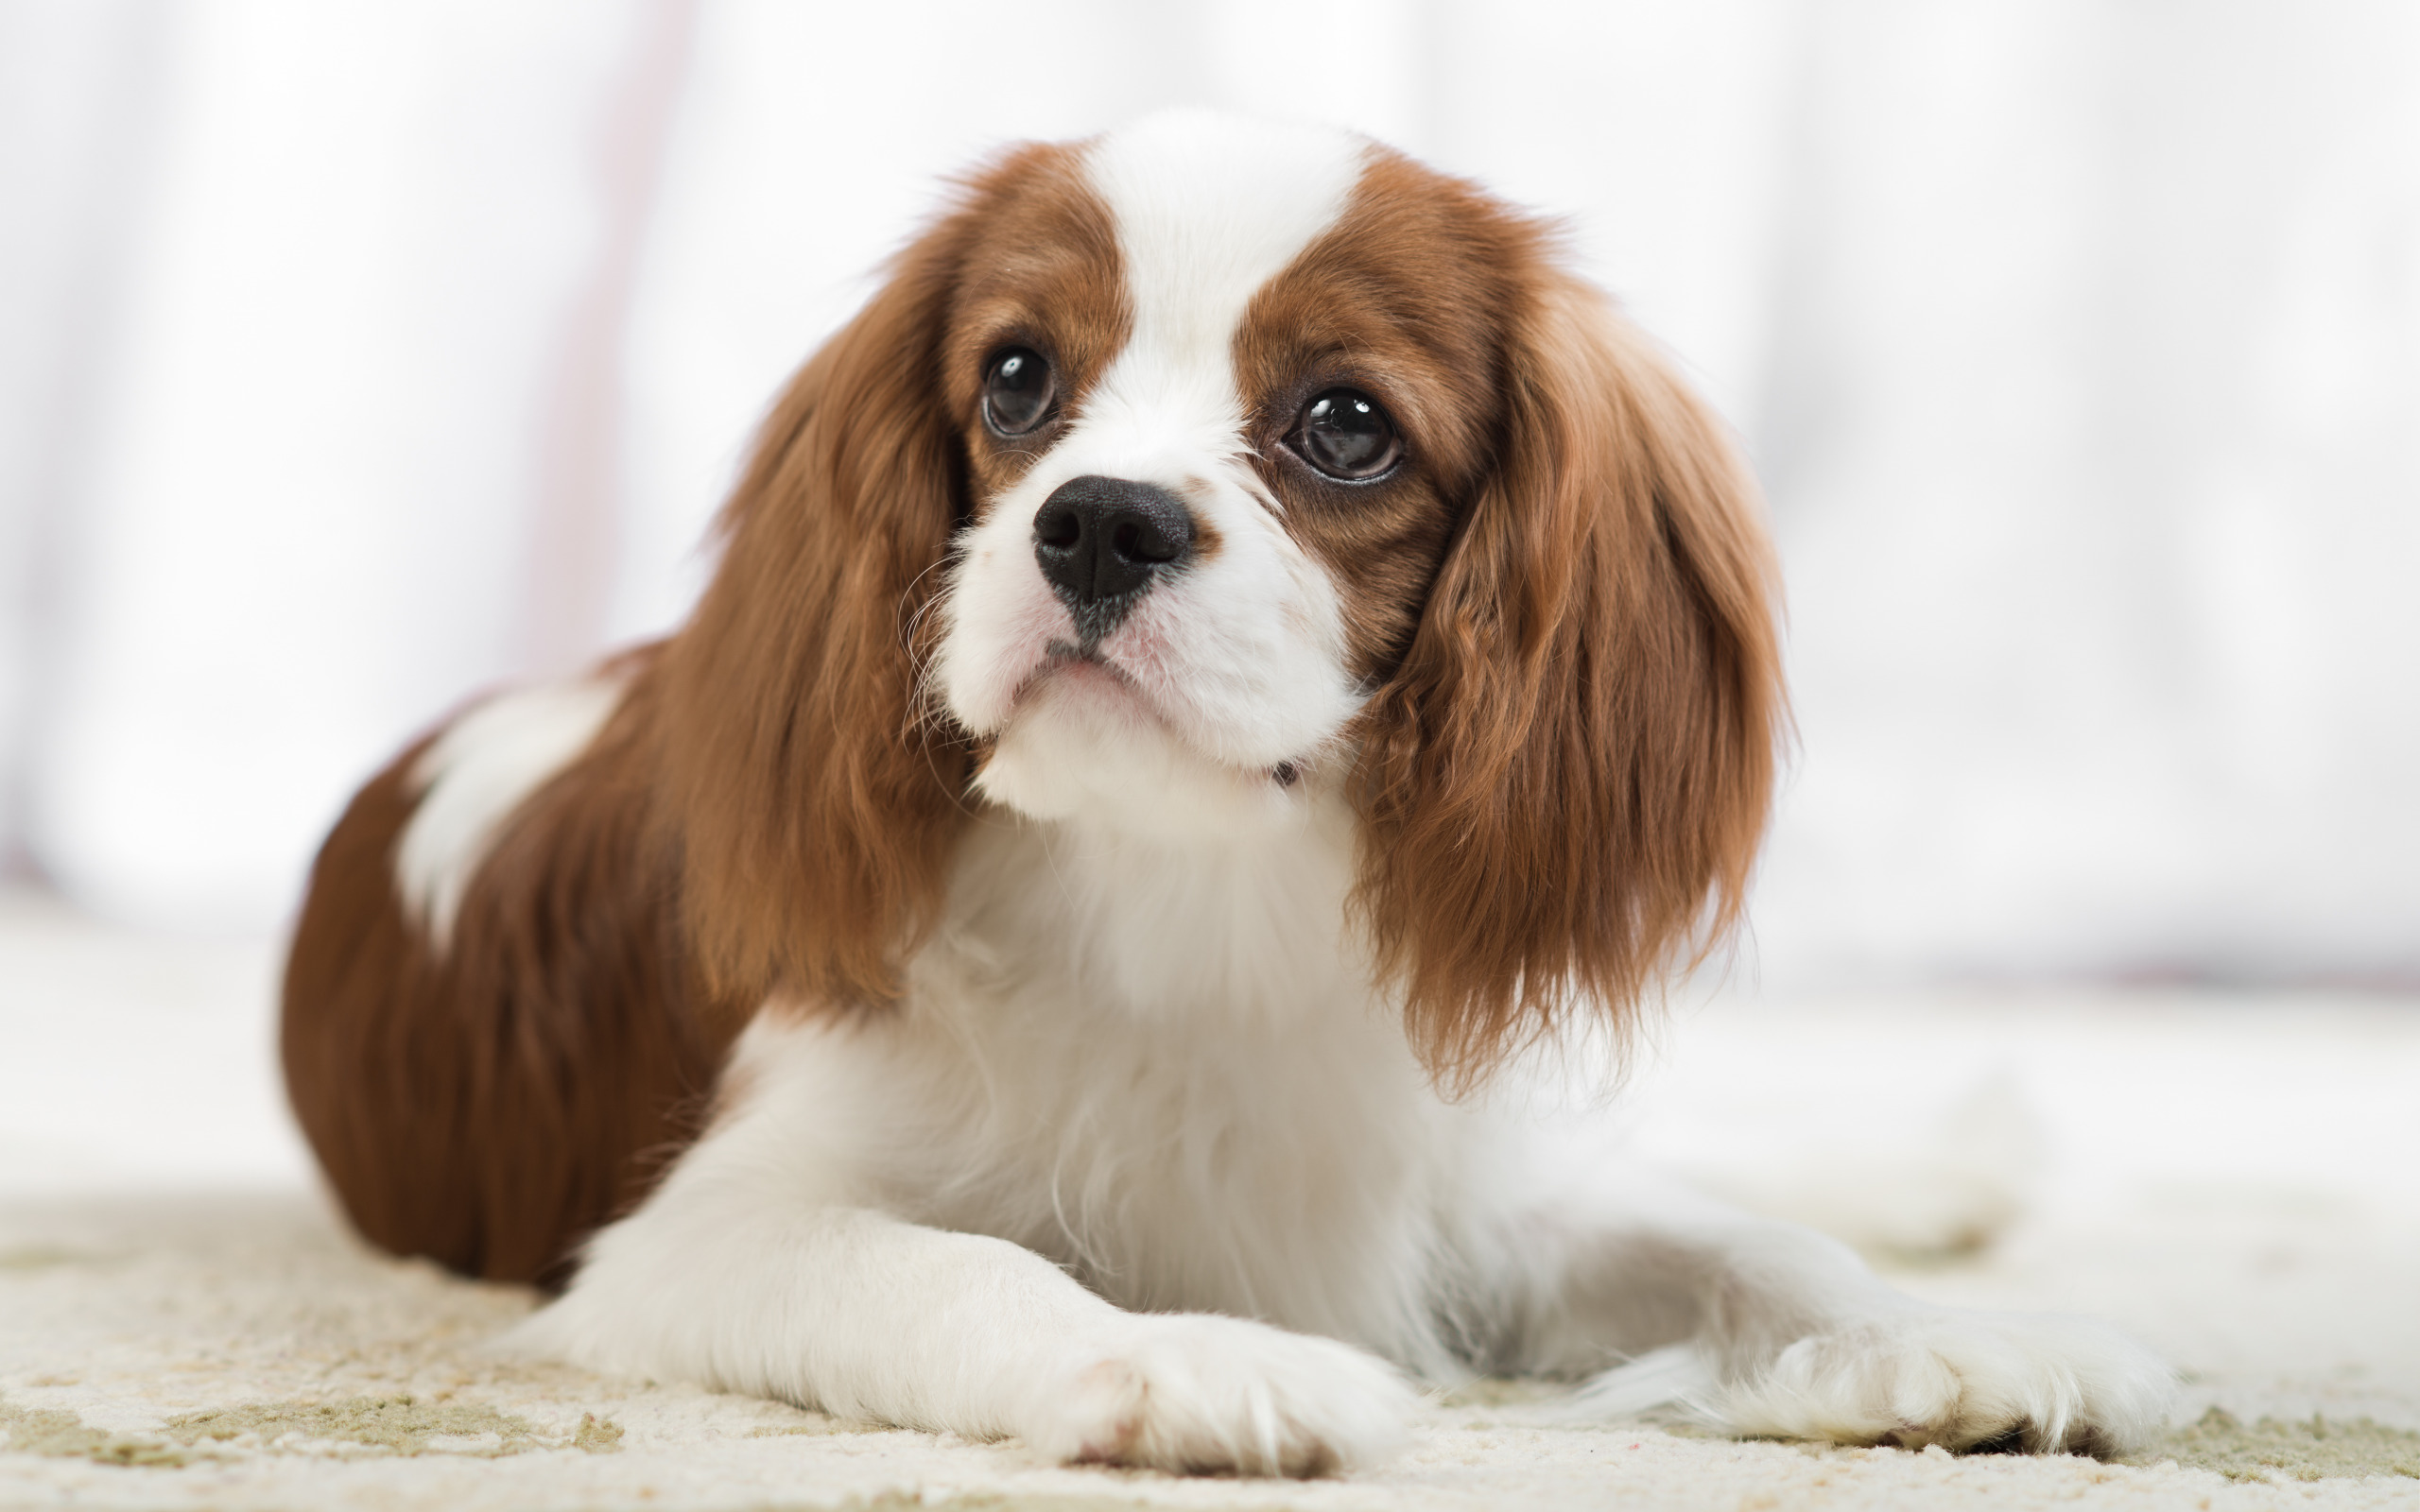 Cavalier King Charles Spaniel, White Brown Dogs, Cute - King Charles Spaniel Wallpaper Phone , HD Wallpaper & Backgrounds